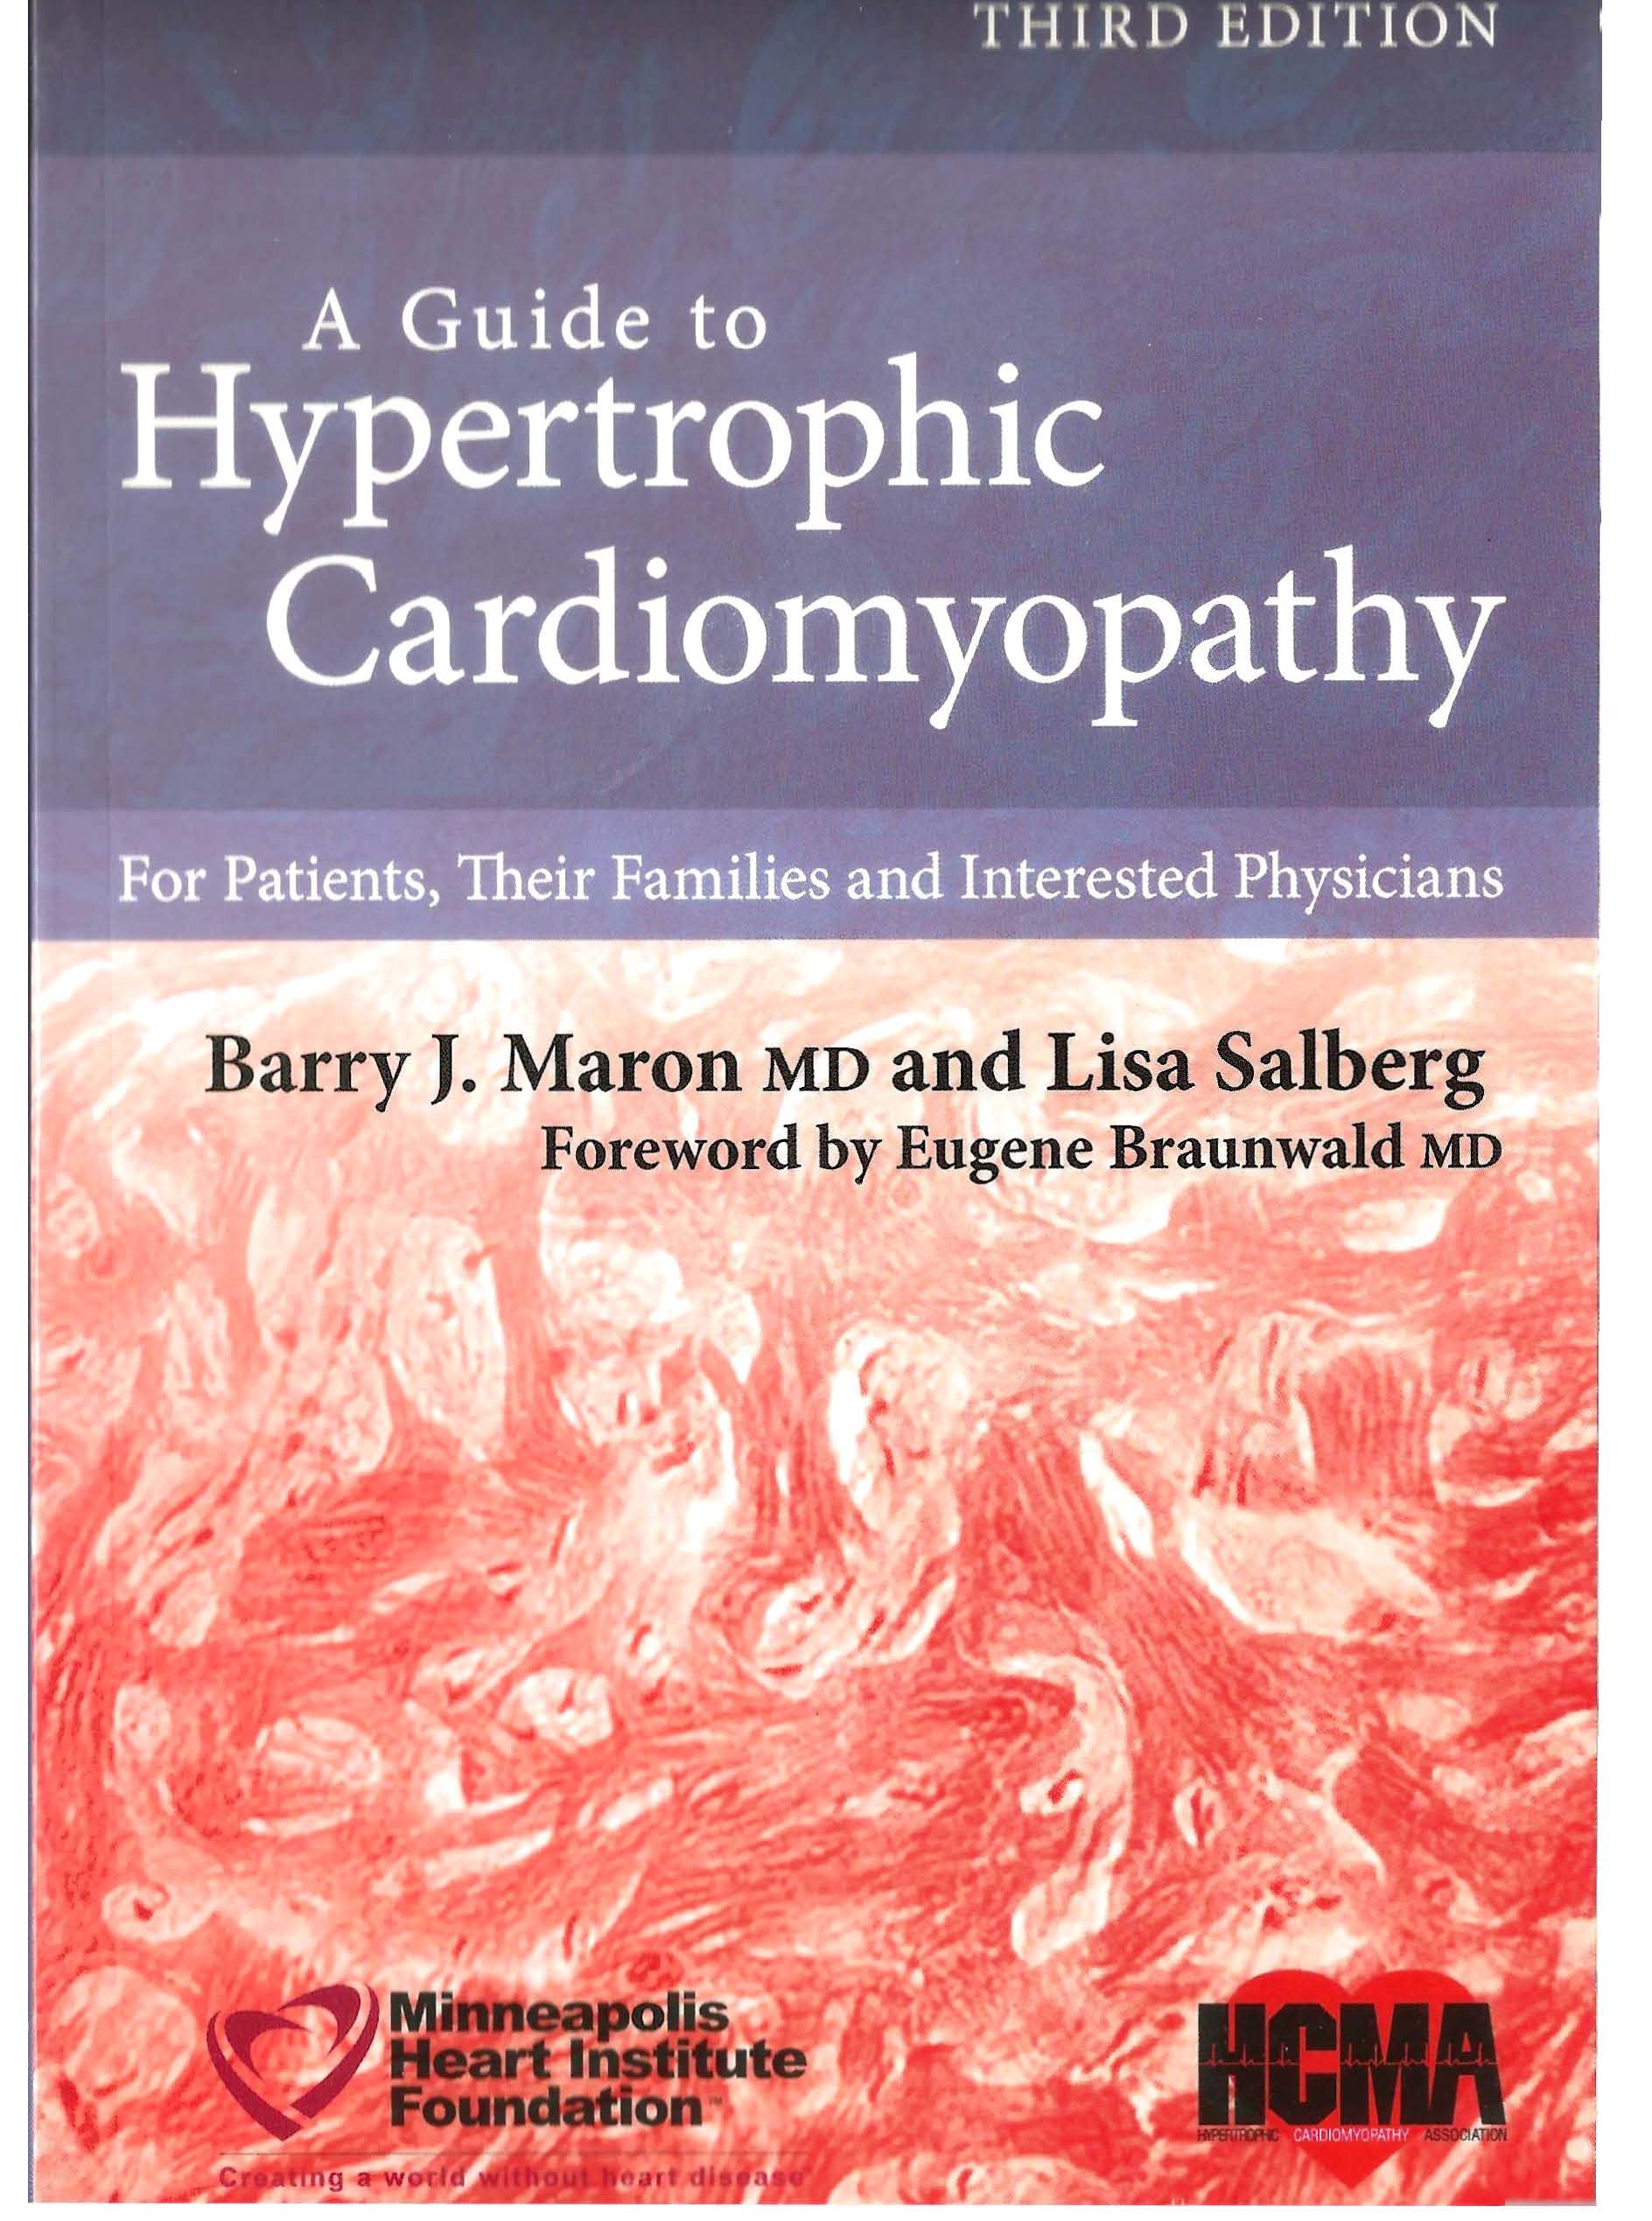 3rd Edition Cover Image